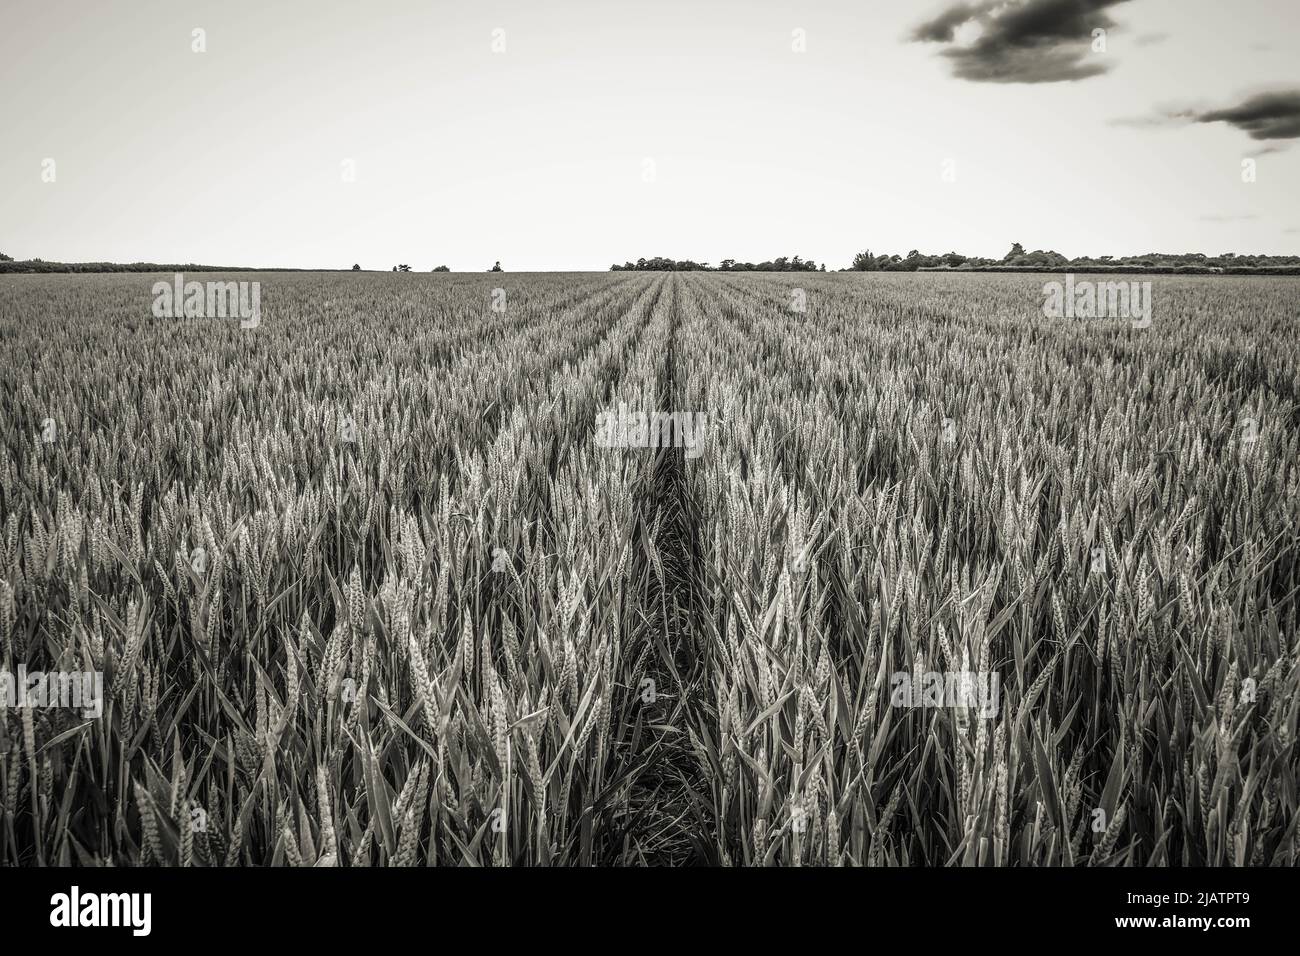 A wheat field in the English countryside Stock Photo